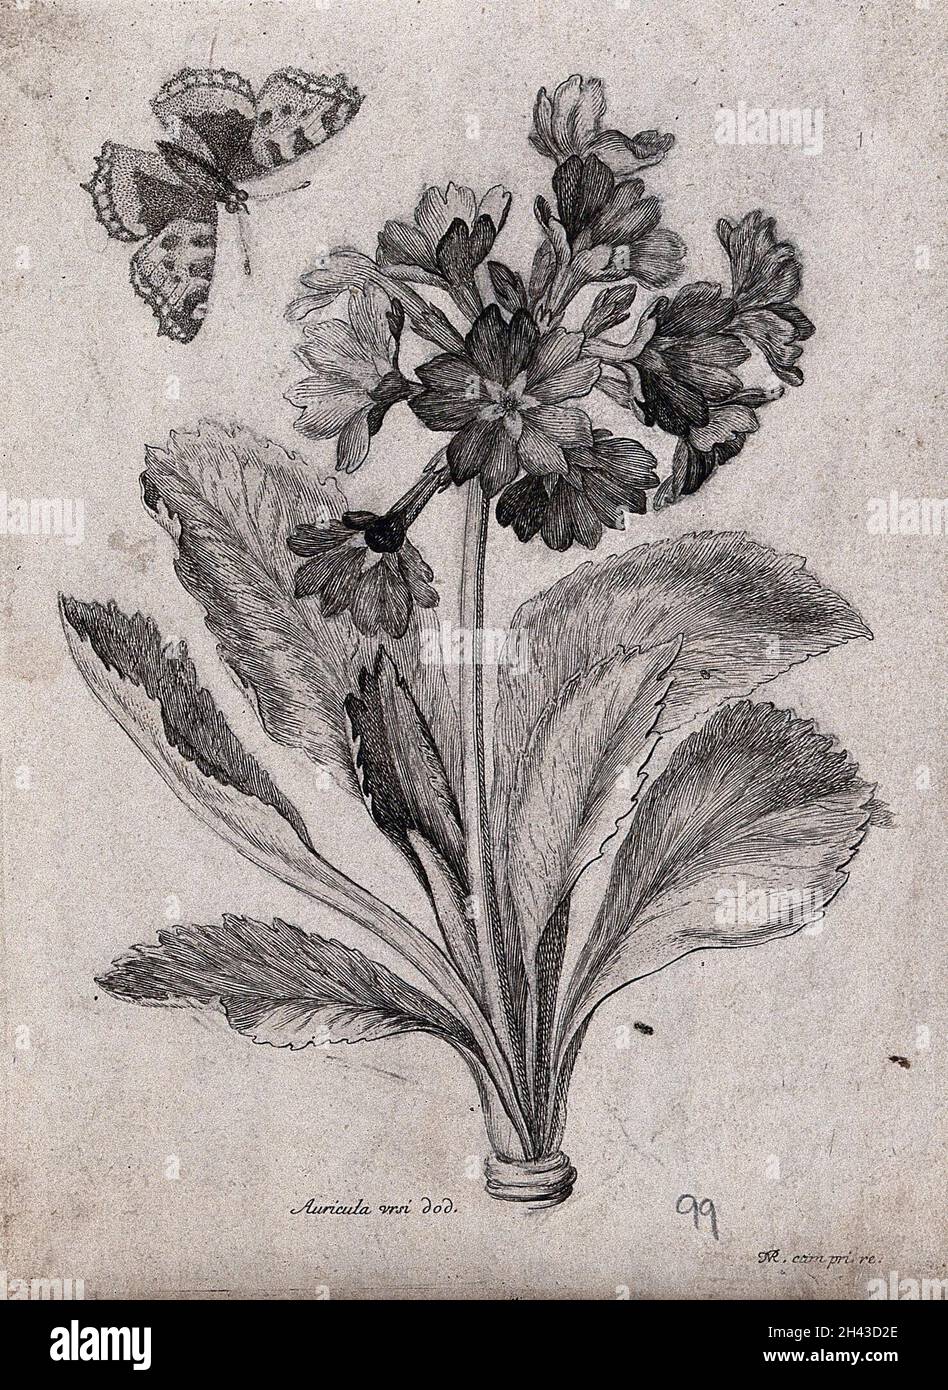 An auricula plant (Primula auricula): flowering stem with a butterfly. Etching by N. Robert, c. 1660, after himself. Stock Photo